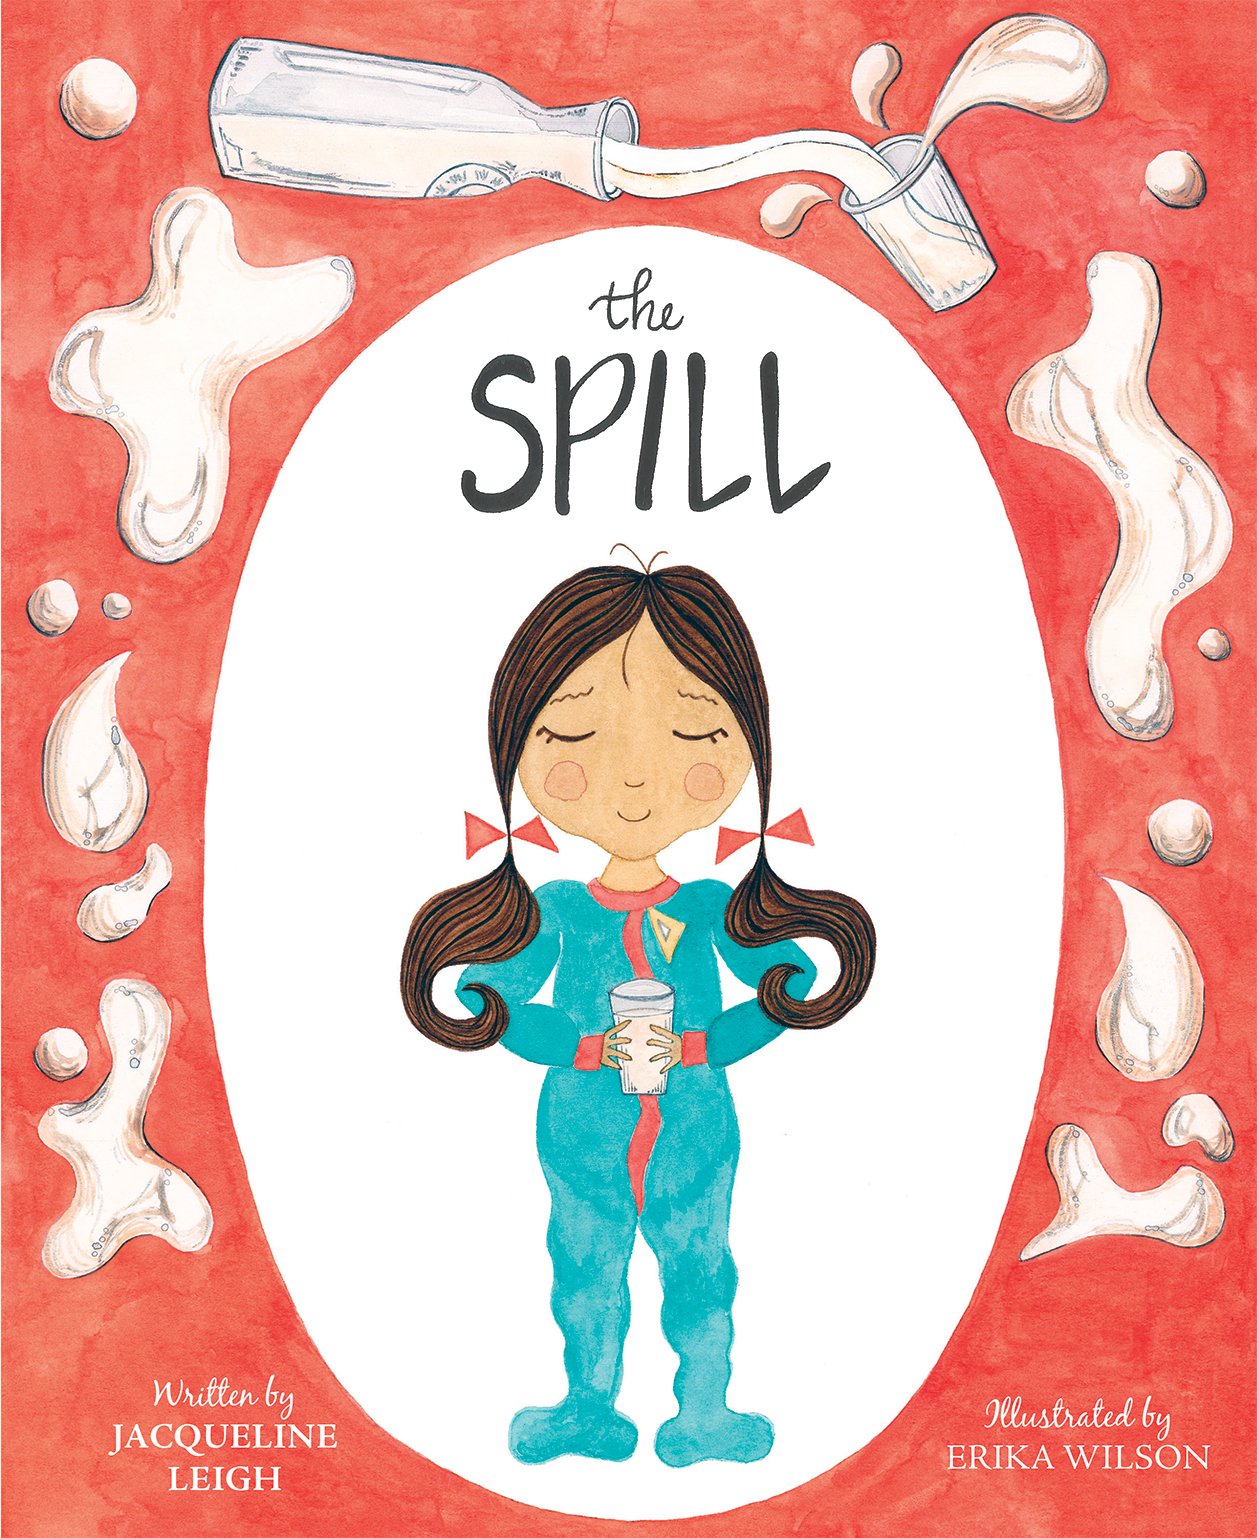 THE SPILL by Jacqueline Leigh